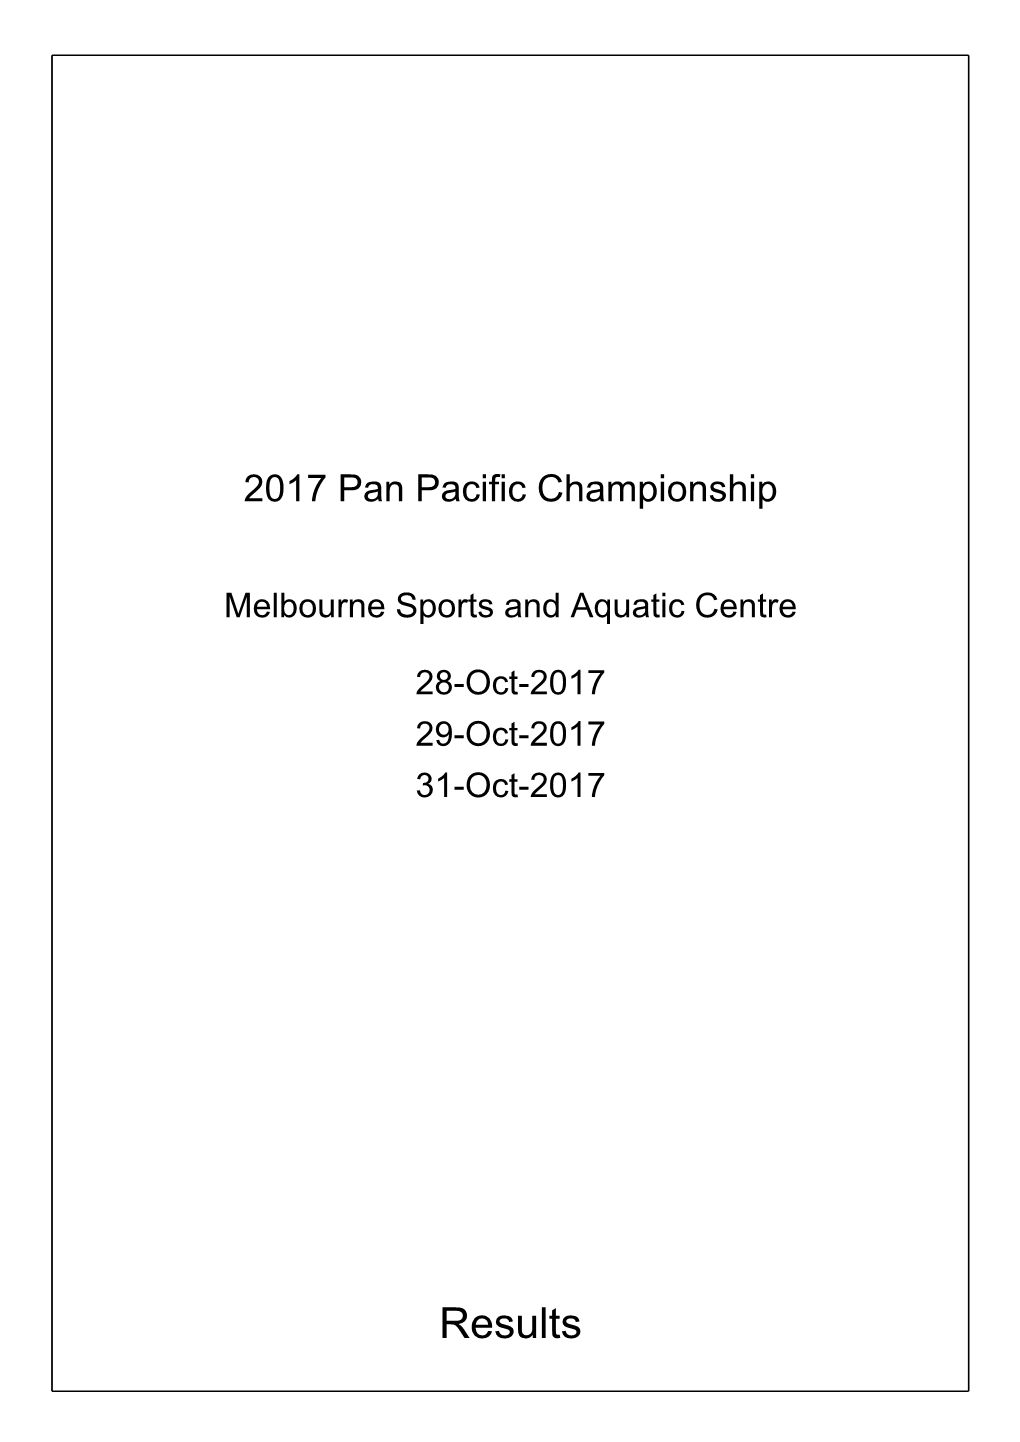 Results 2017 Pan Pacific Championship, 28-Oct-2017 - Results Generated: 05-May-2020 14:46:20